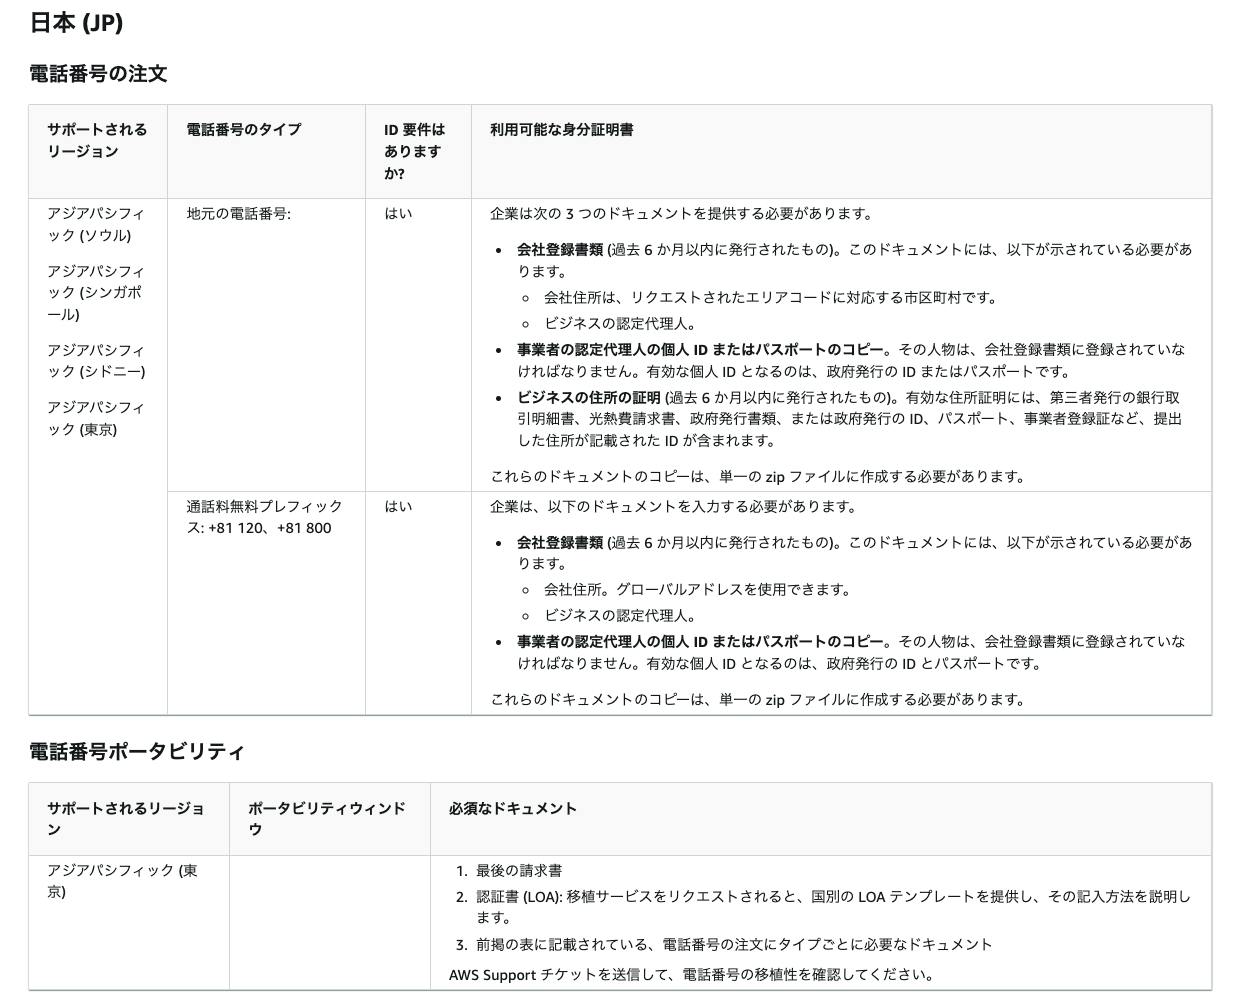 https://docs.aws.amazon.com/ja_jp/connect/latest/adminguide/phone-number-requirements.html#japan-requirements